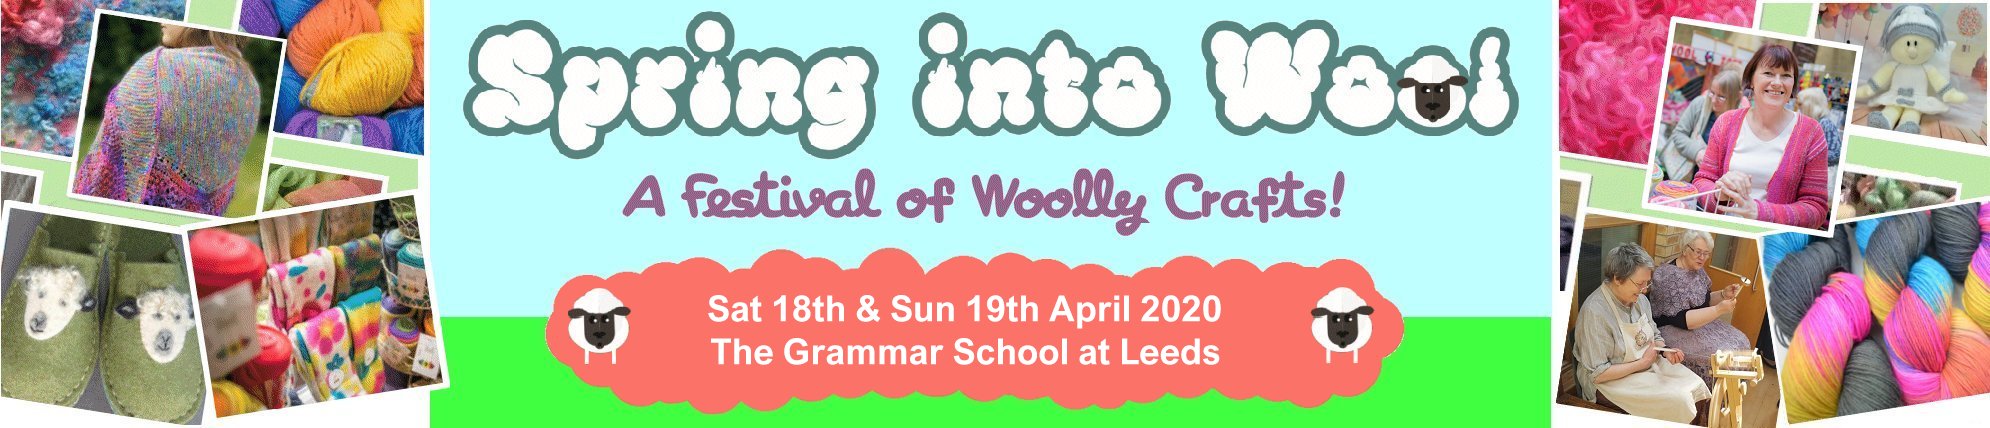 18th -19th April 2020 - Spring Into Wool - The Grammar School at Leeds